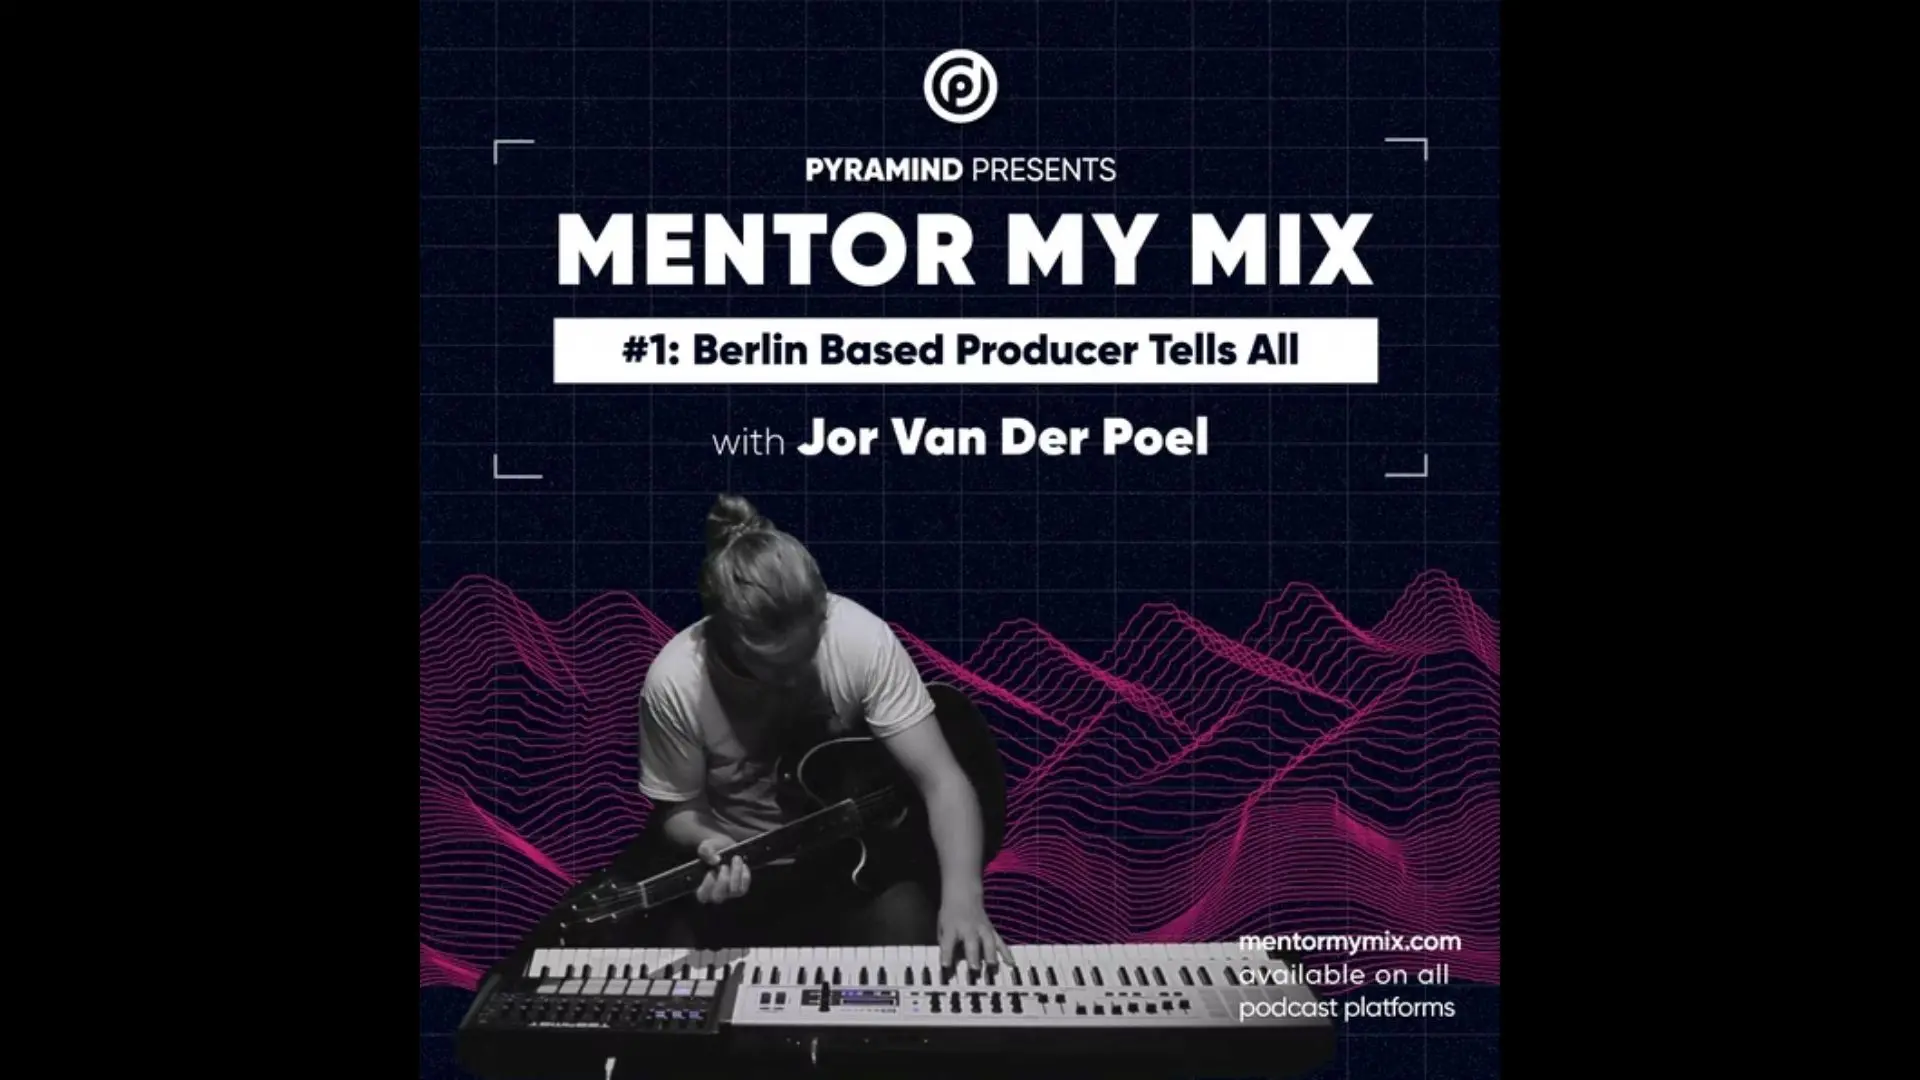 Mentor my mix by Joe Van Peel, a talented music producer specializing in beatmaking. Explore the world of music production online for free with expert guidance from Joe.